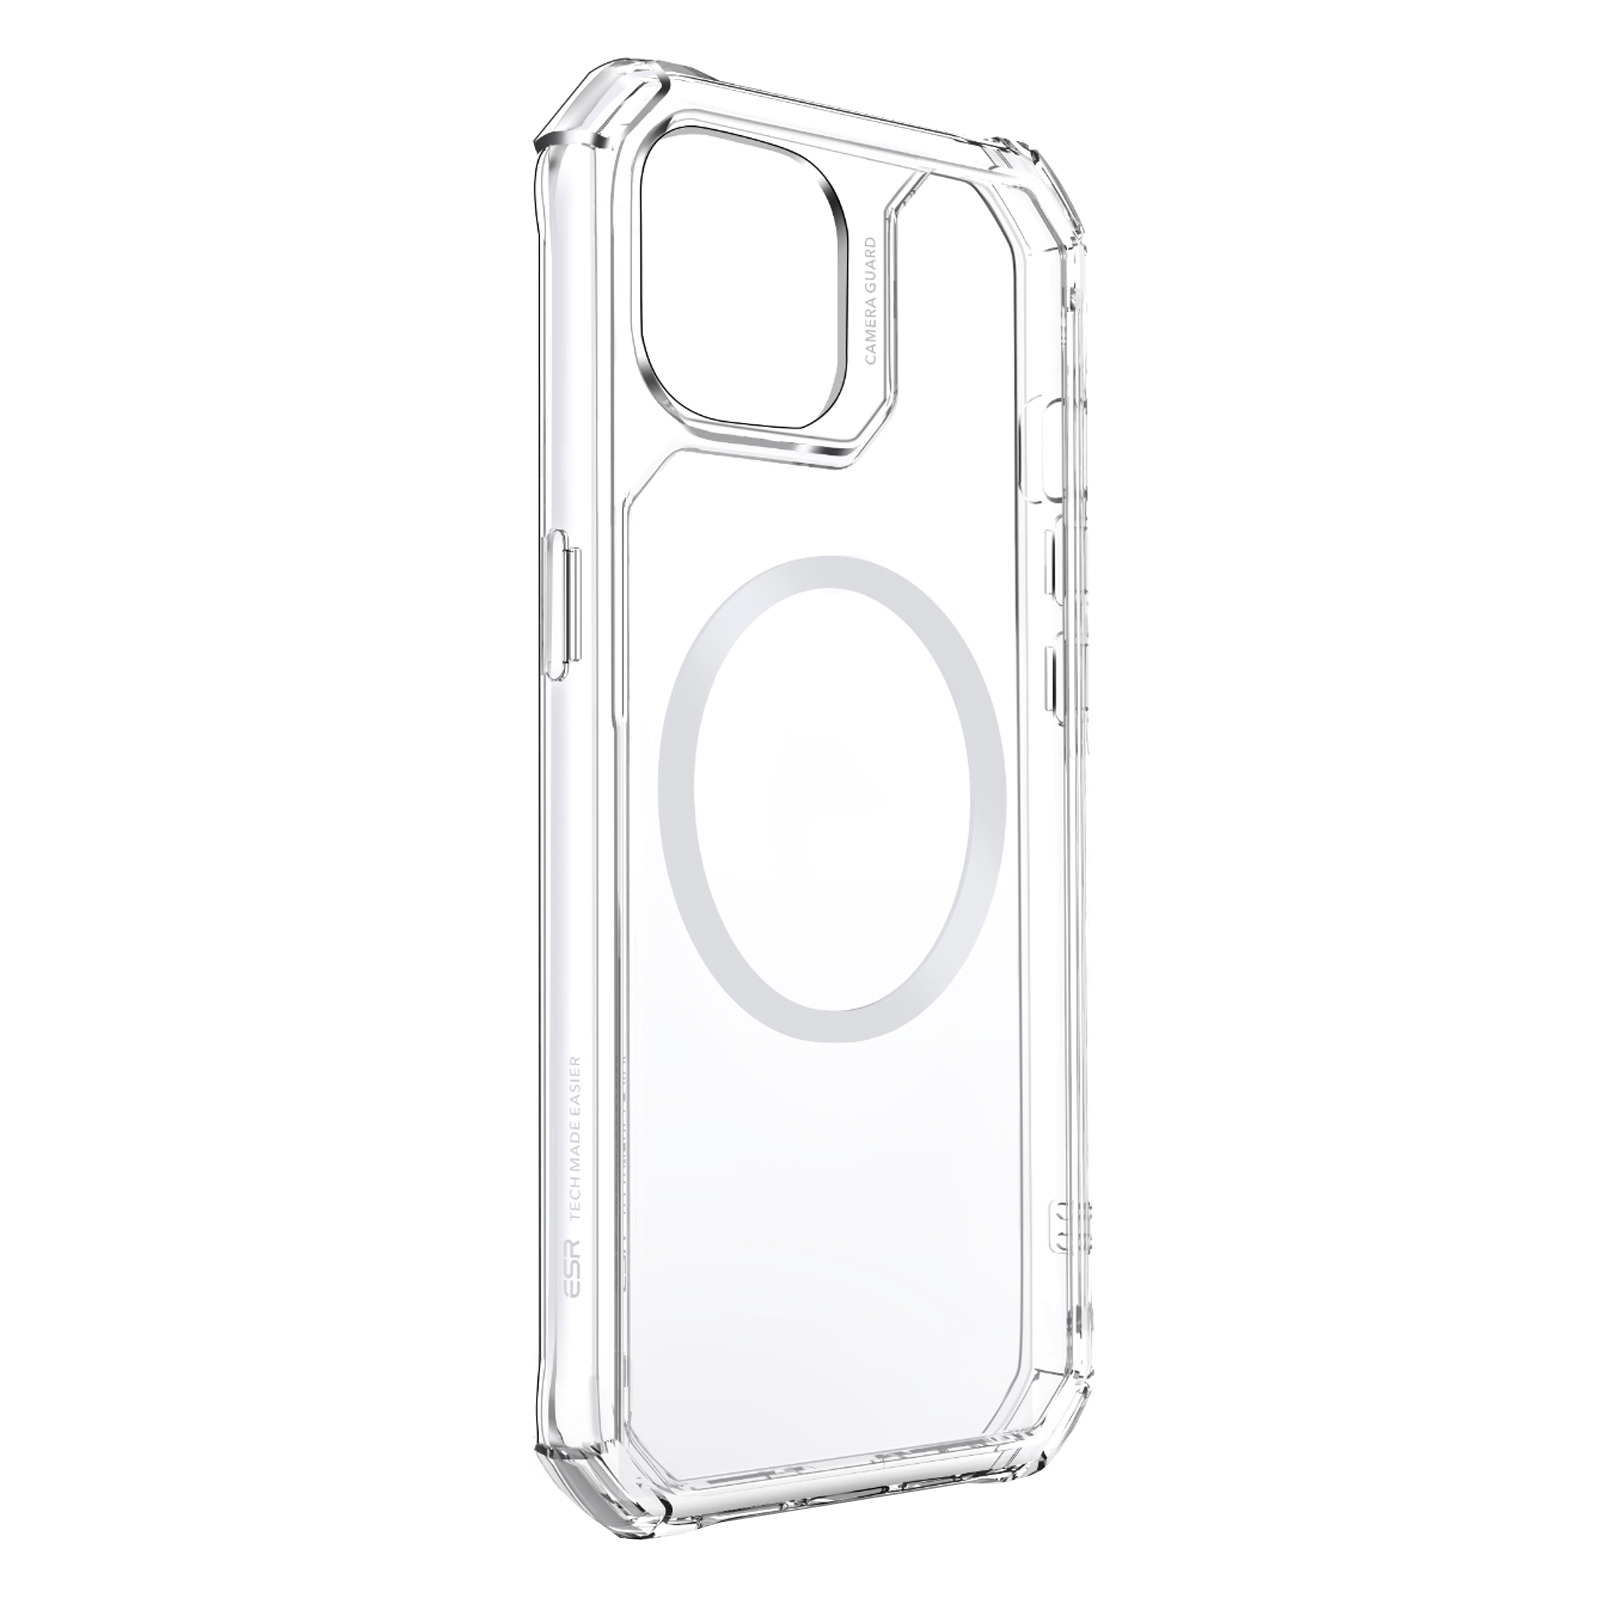 iPhone 13 Pro Air Armor Clear Case, Compatible with MagSafe - ESR